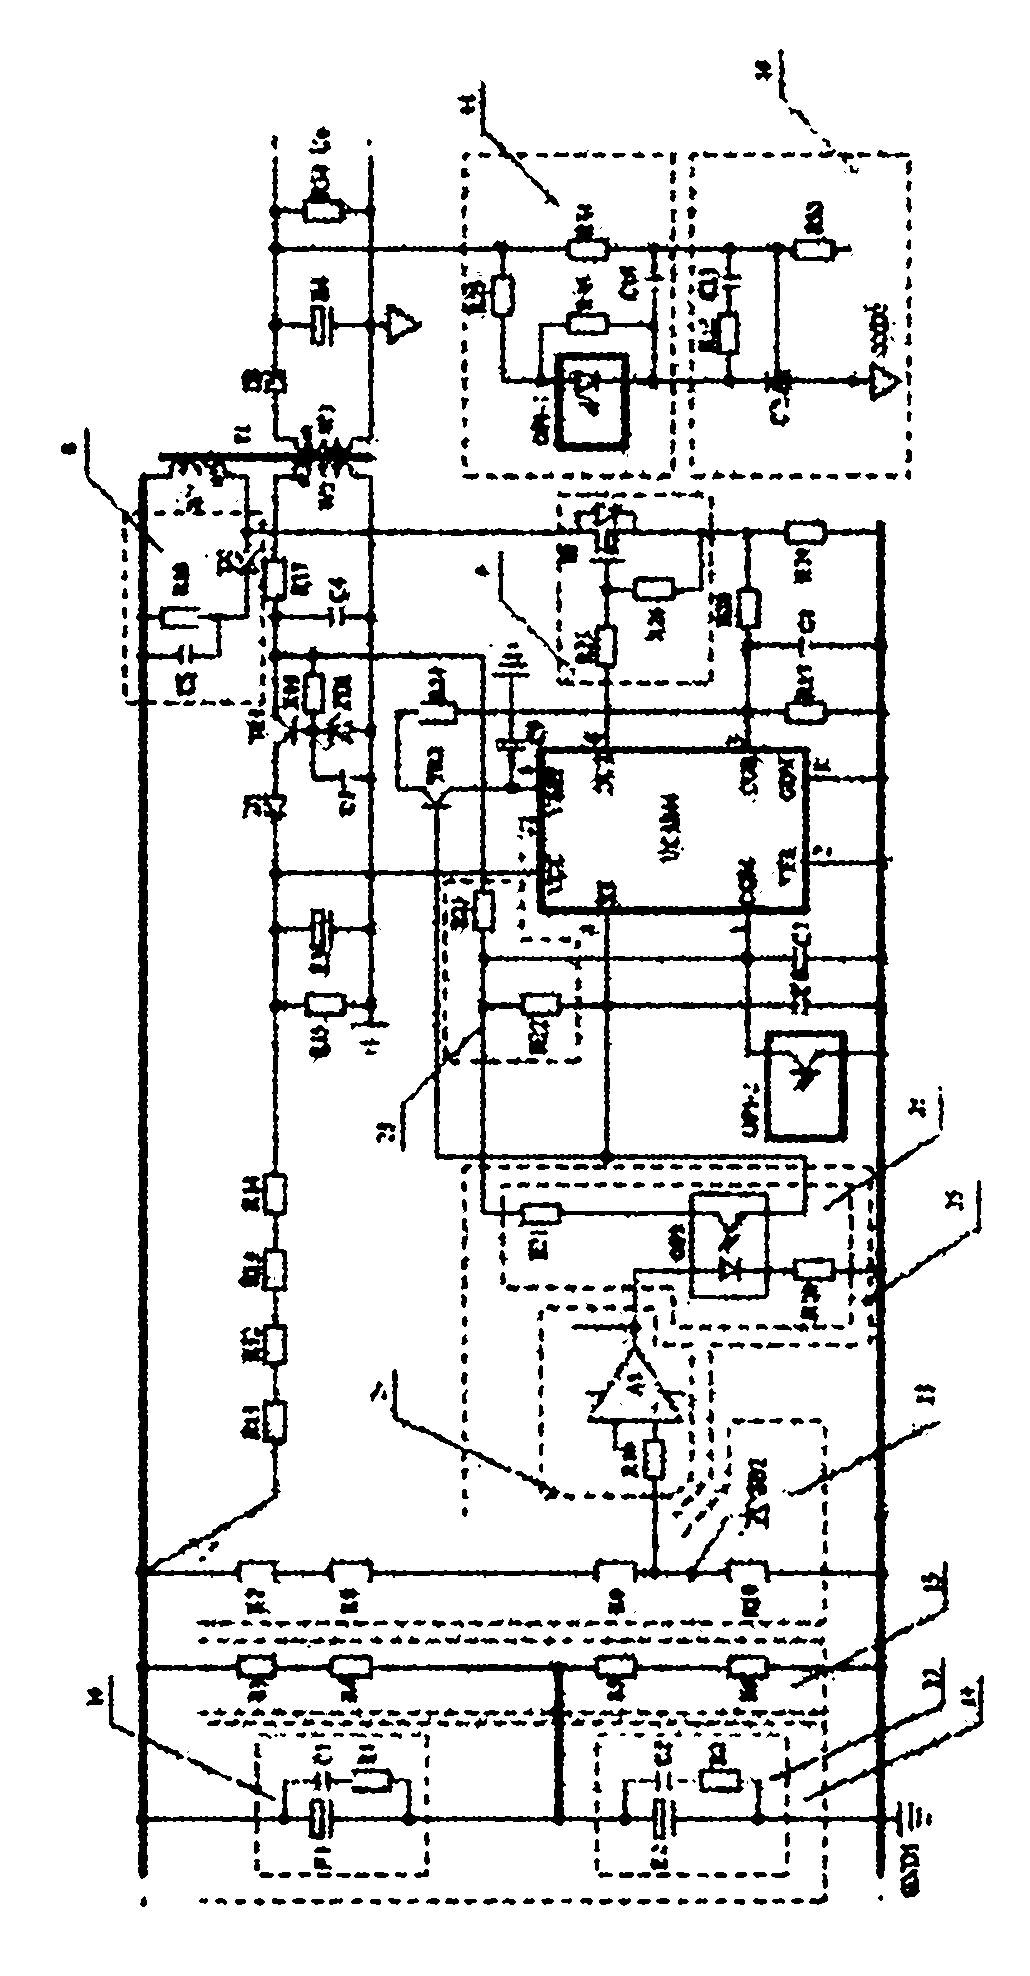 Switching power supply with single-stage high wide input voltage